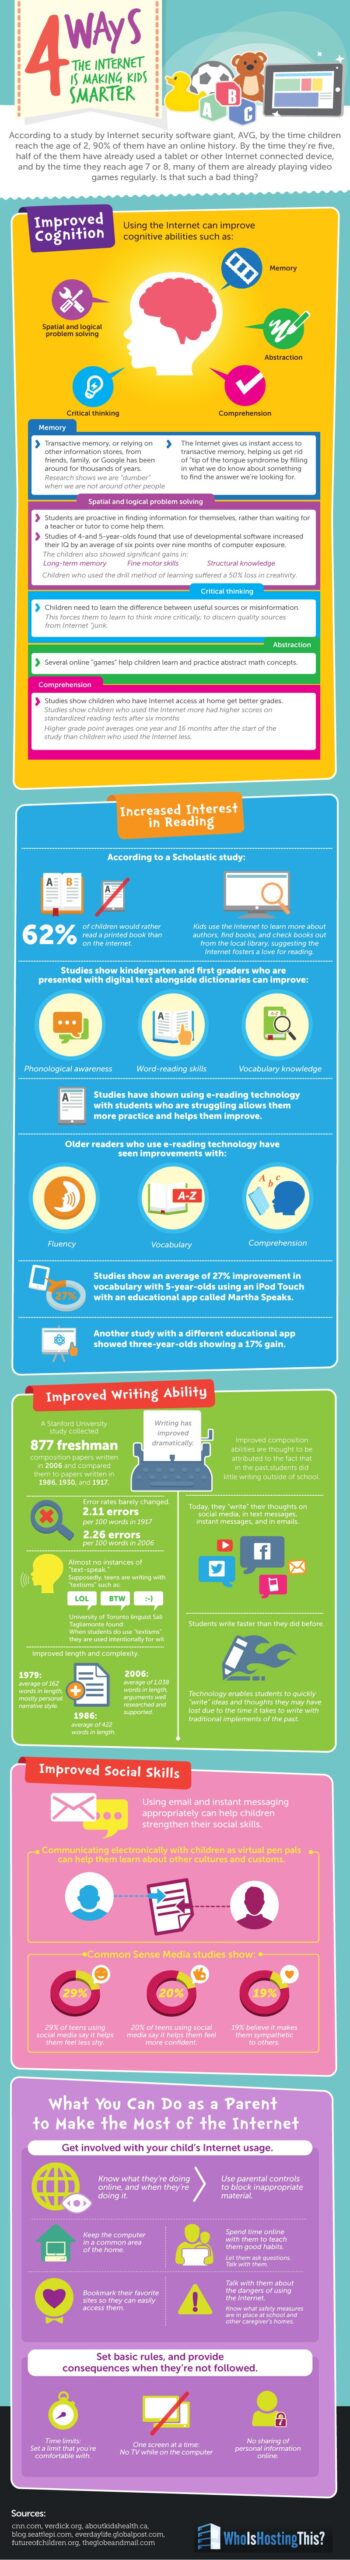 A Day In The Life Of Internet Infographic - e-Learning Infographics